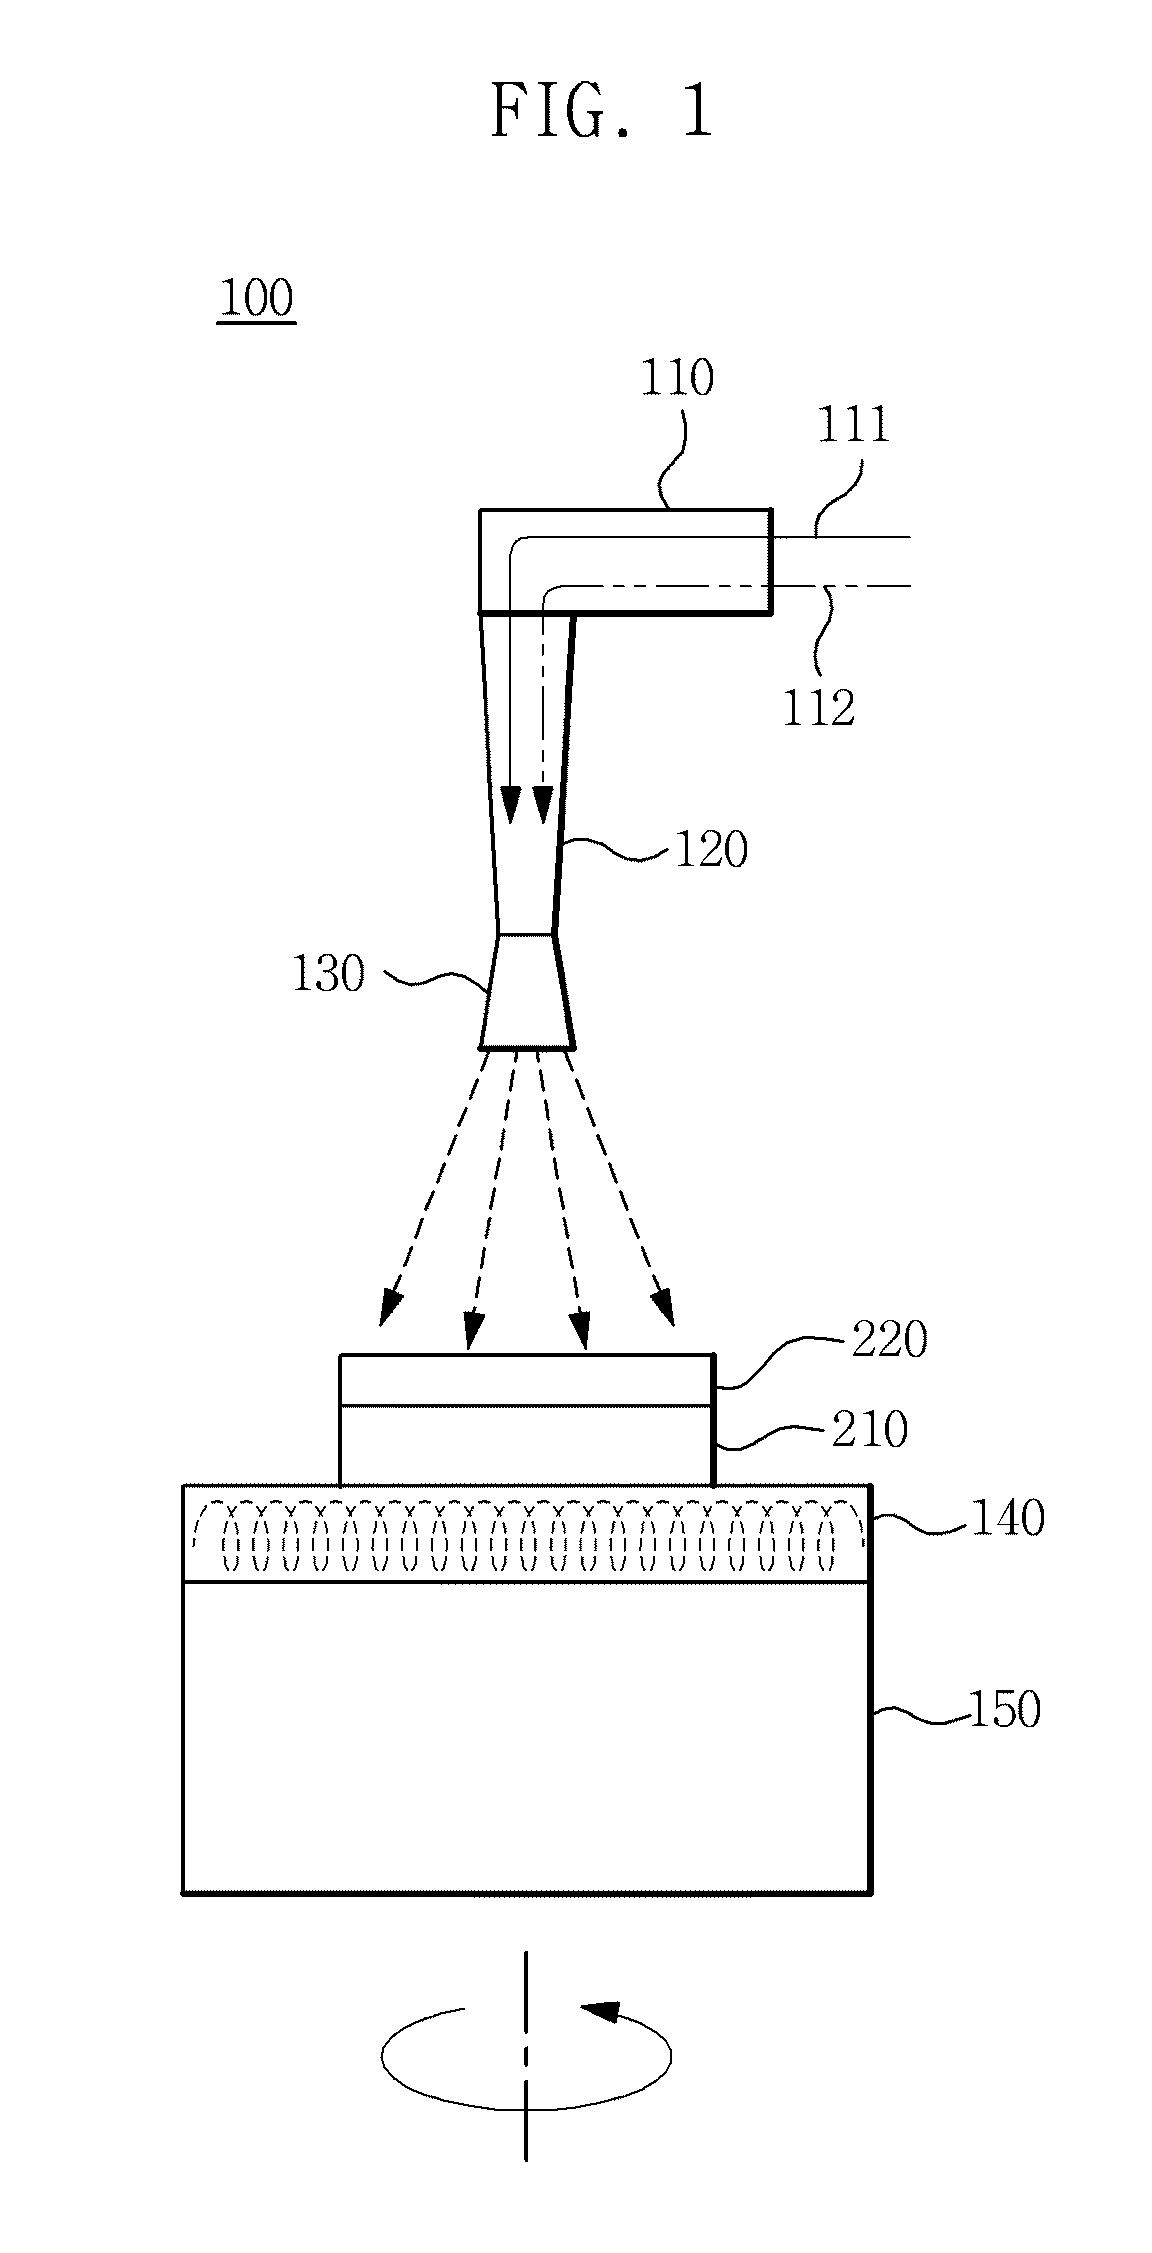 Method of manufacturing thin-film light-absorbing layer, and method of manufacturing thin-film solar cell using the same